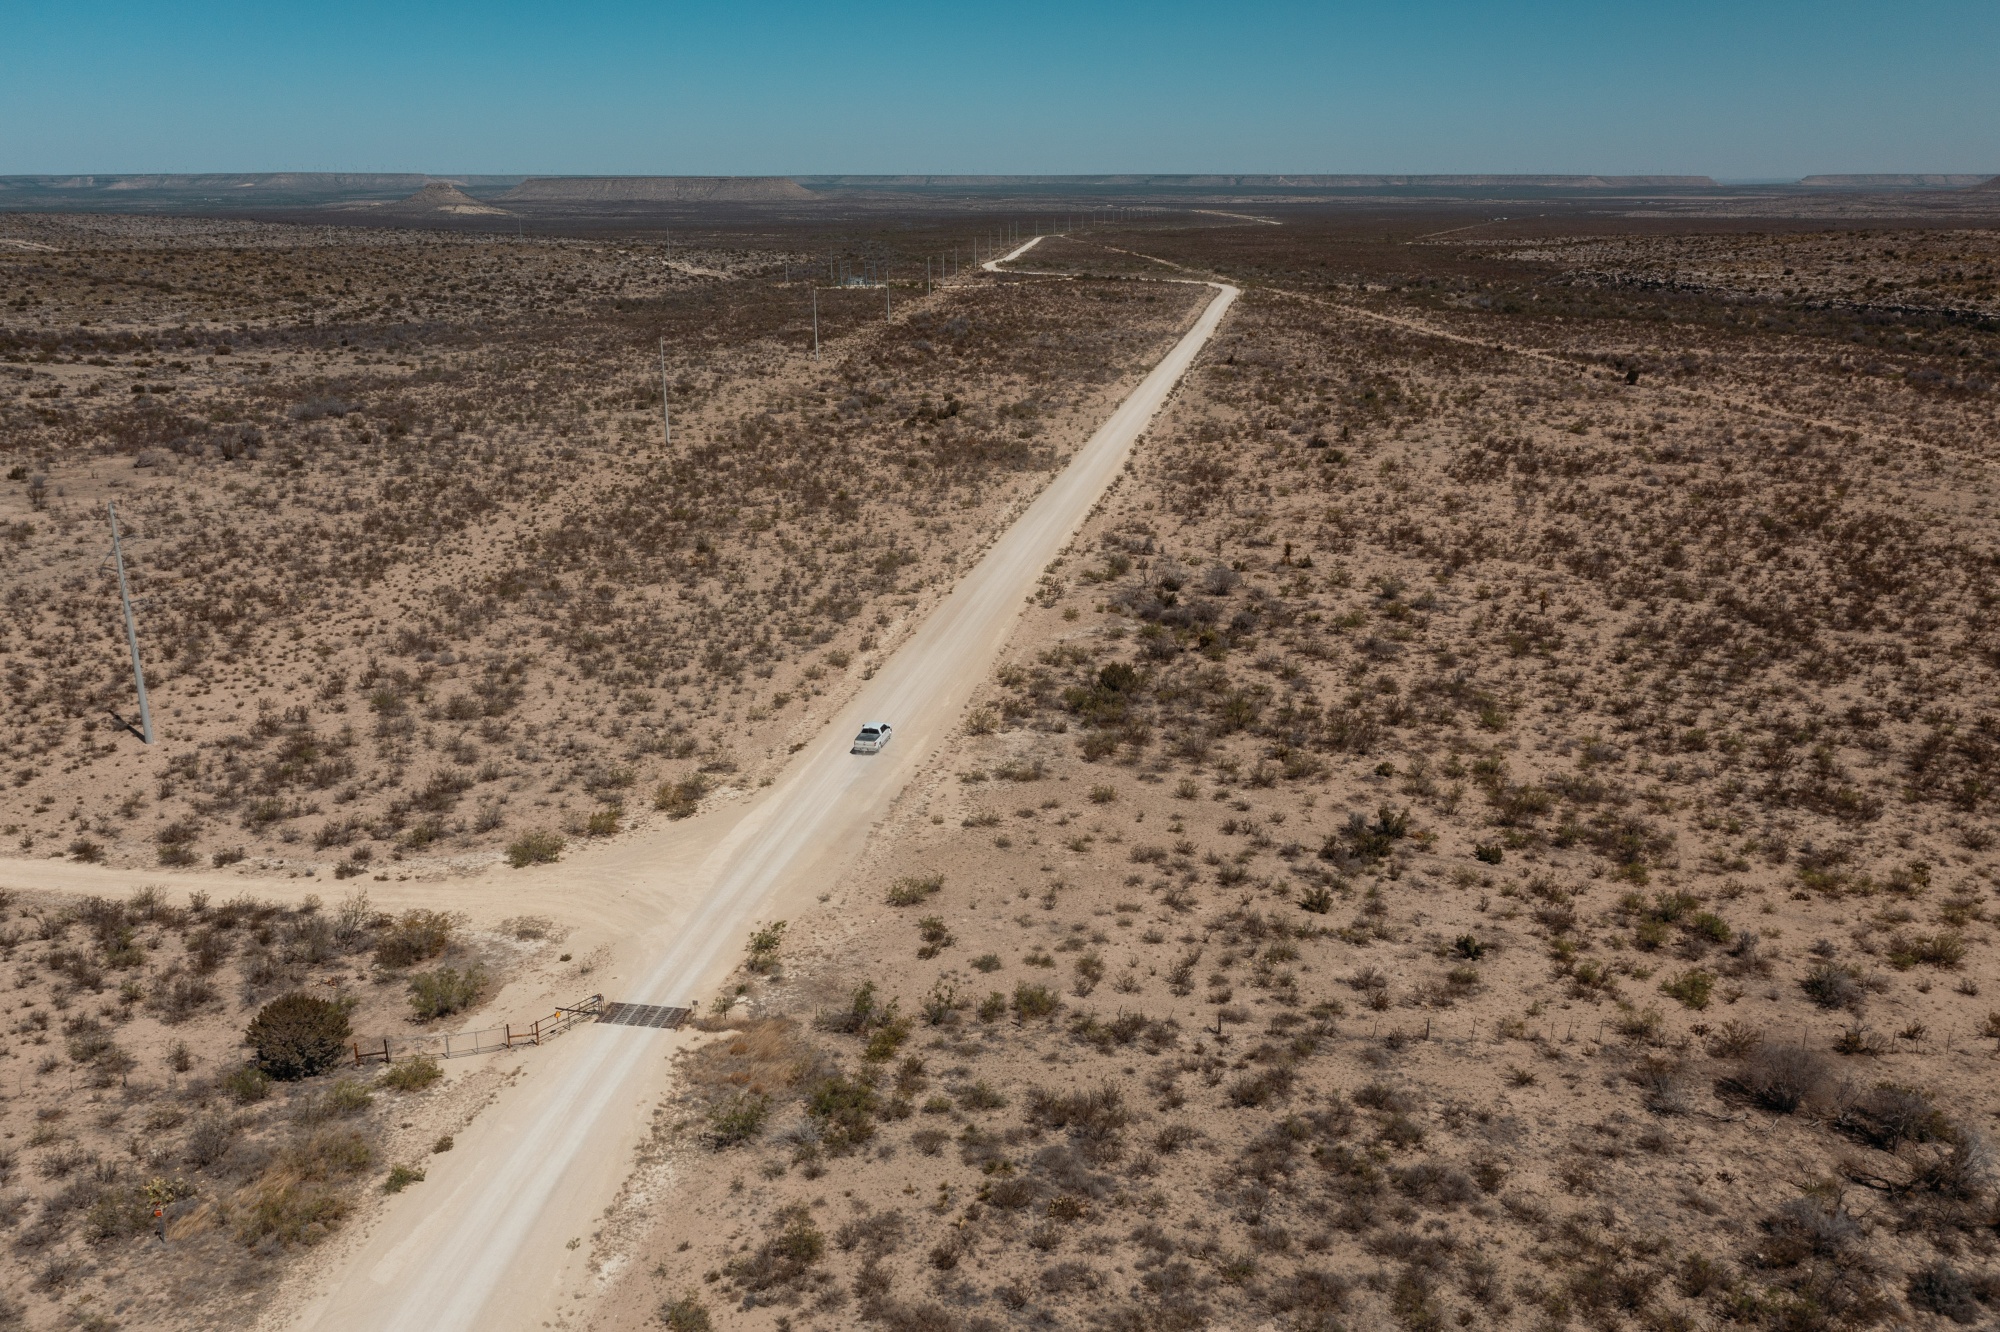 Nothing but dry brush along&nbsp;a dirt road leading from Interstate 10 to the Cormint Data Systems Bitcoin mining facility in Fort Stockton, Texas, U.S., on Friday, April 29, 2022.&nbsp;